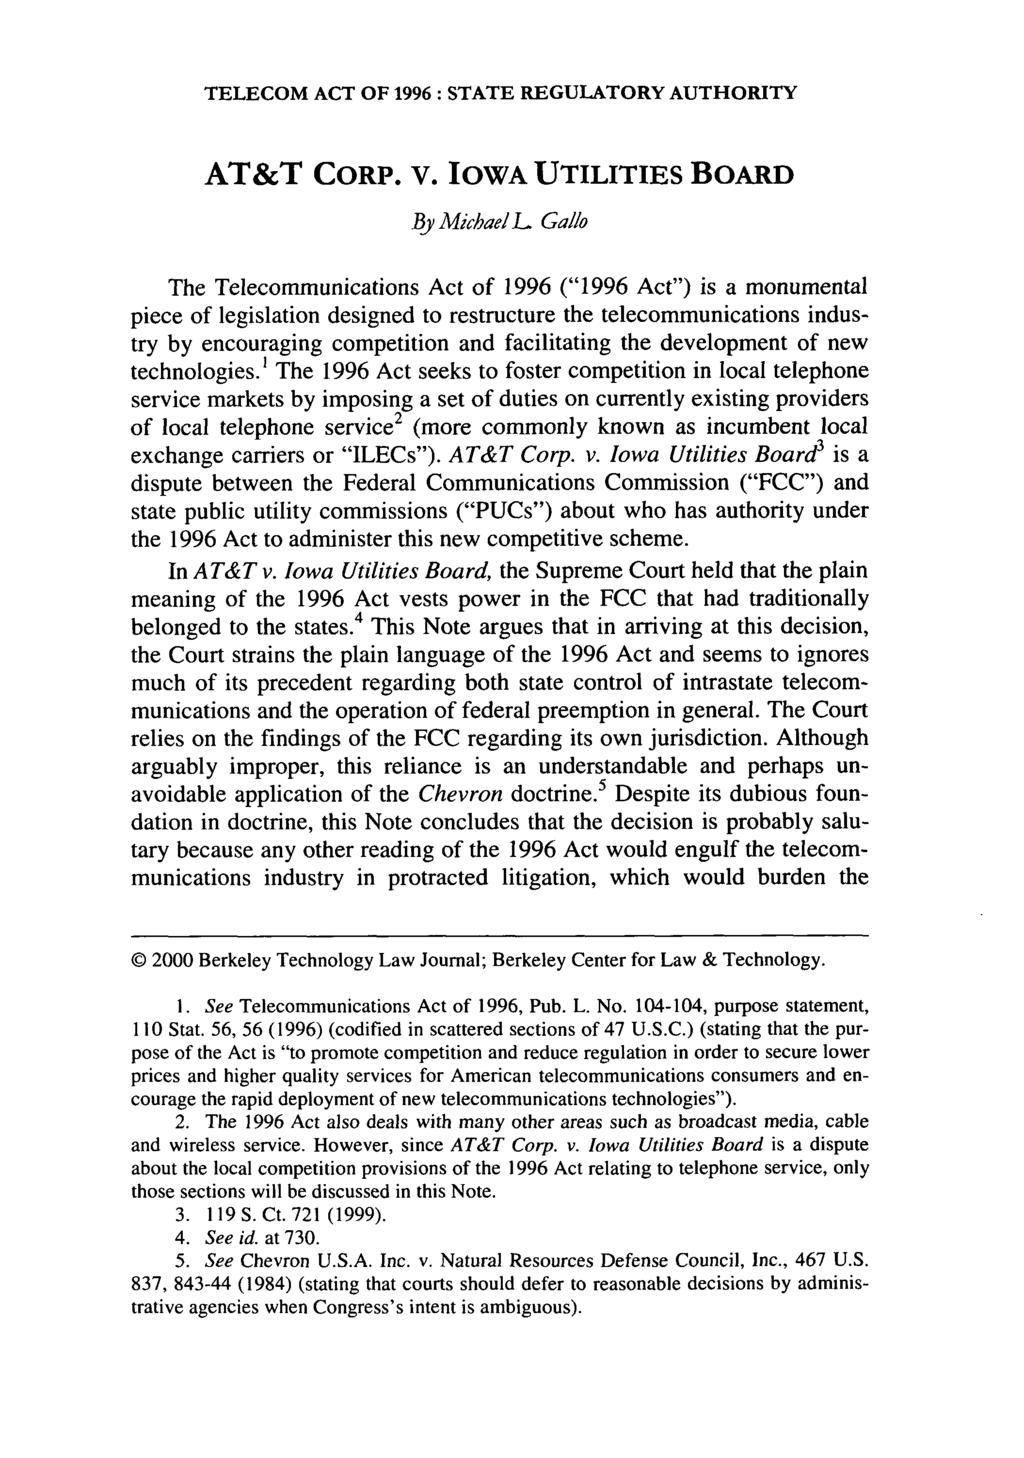 TELECOM ACT OF 1996: STATE REGULATORY AUTHORITY AT&T CORP. V.